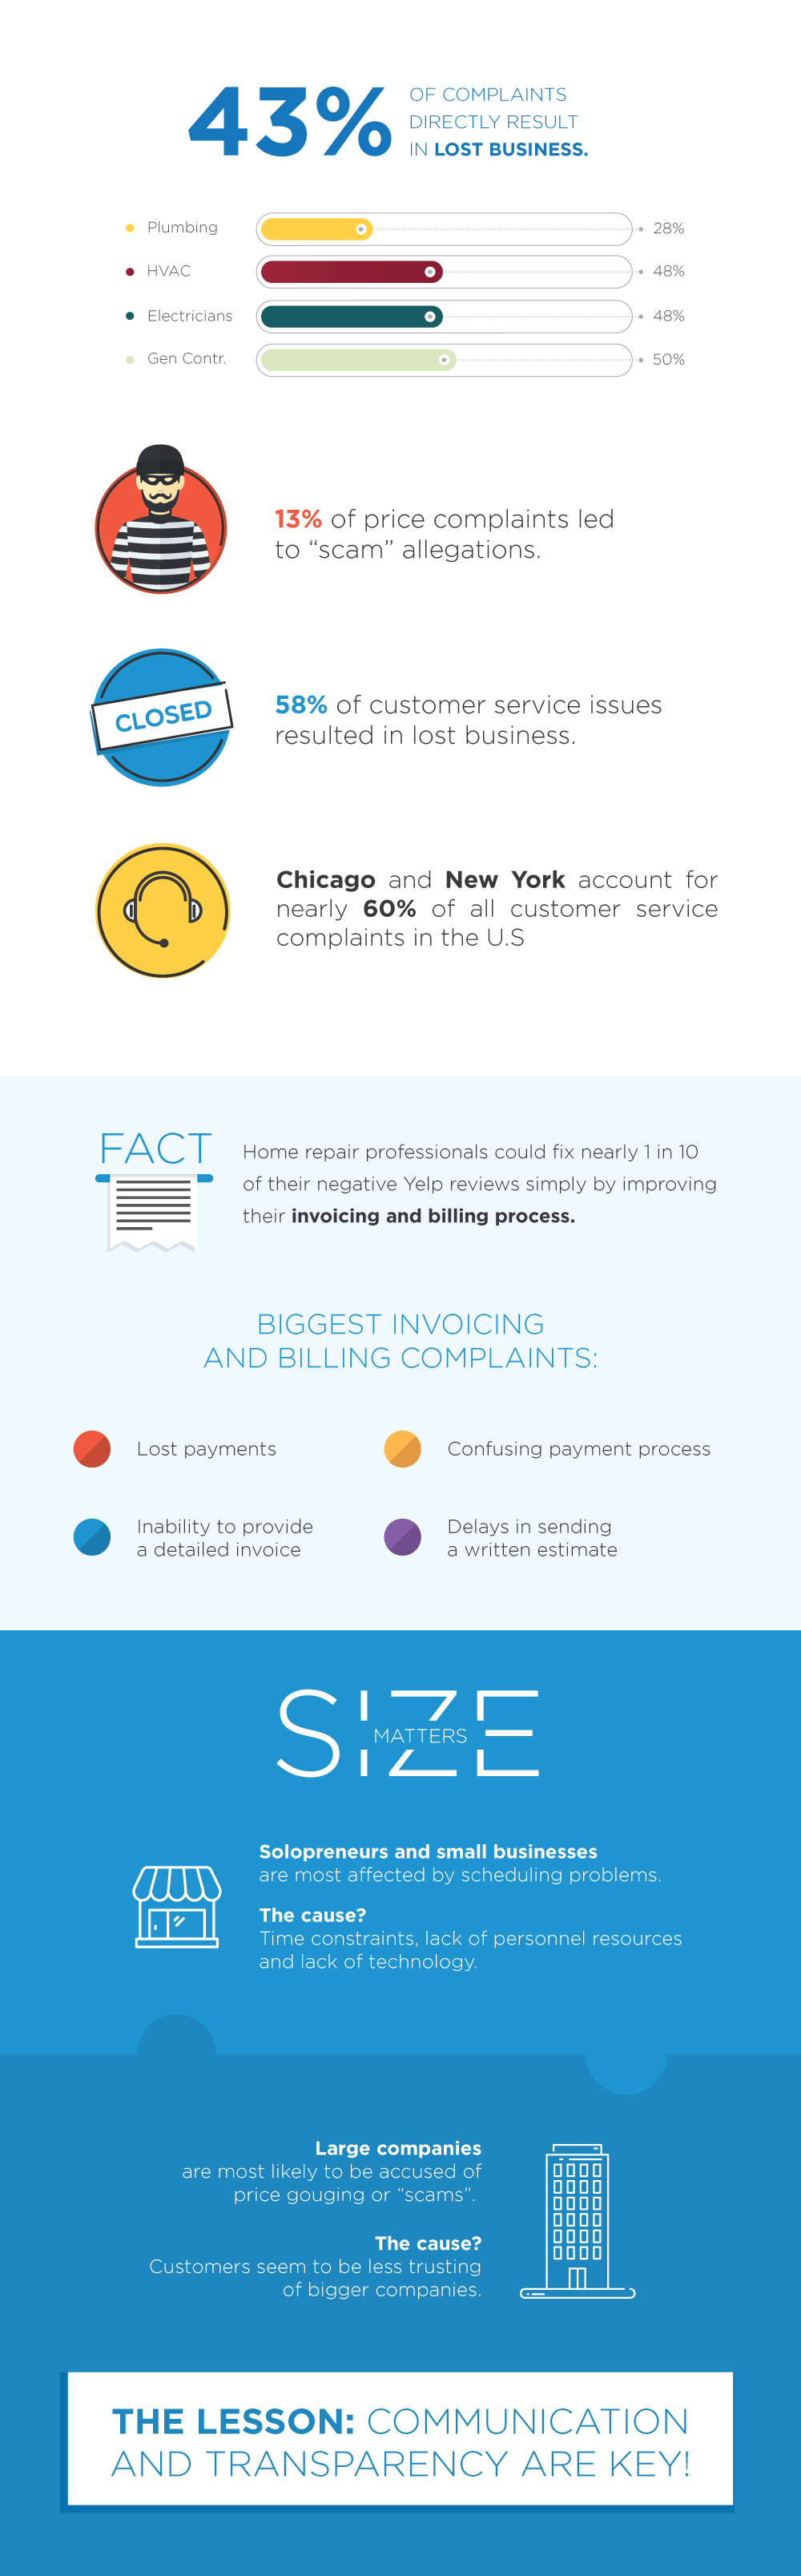 how much do online reviews impact small businesses infographic